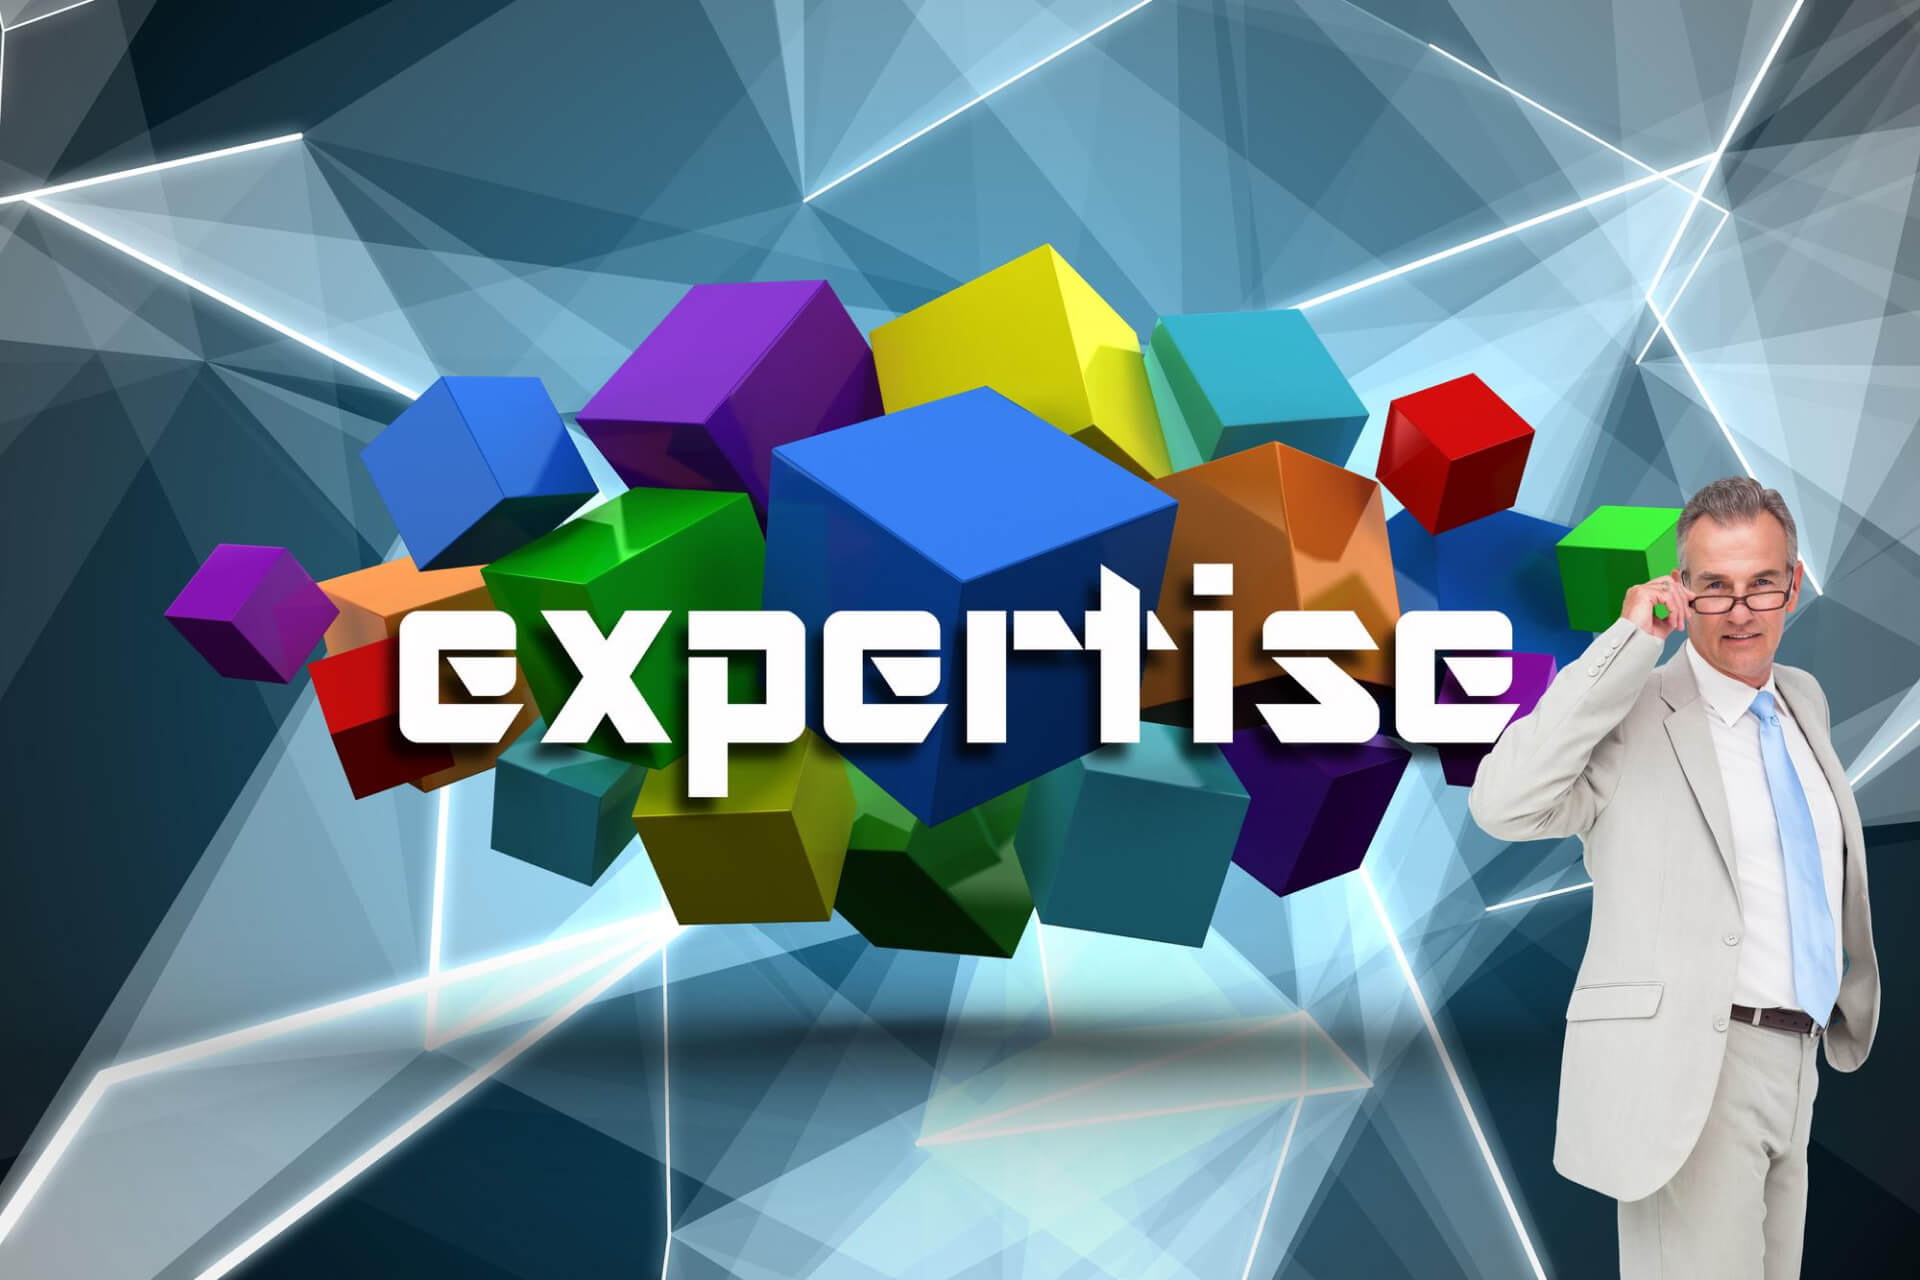 Extensive Expertise